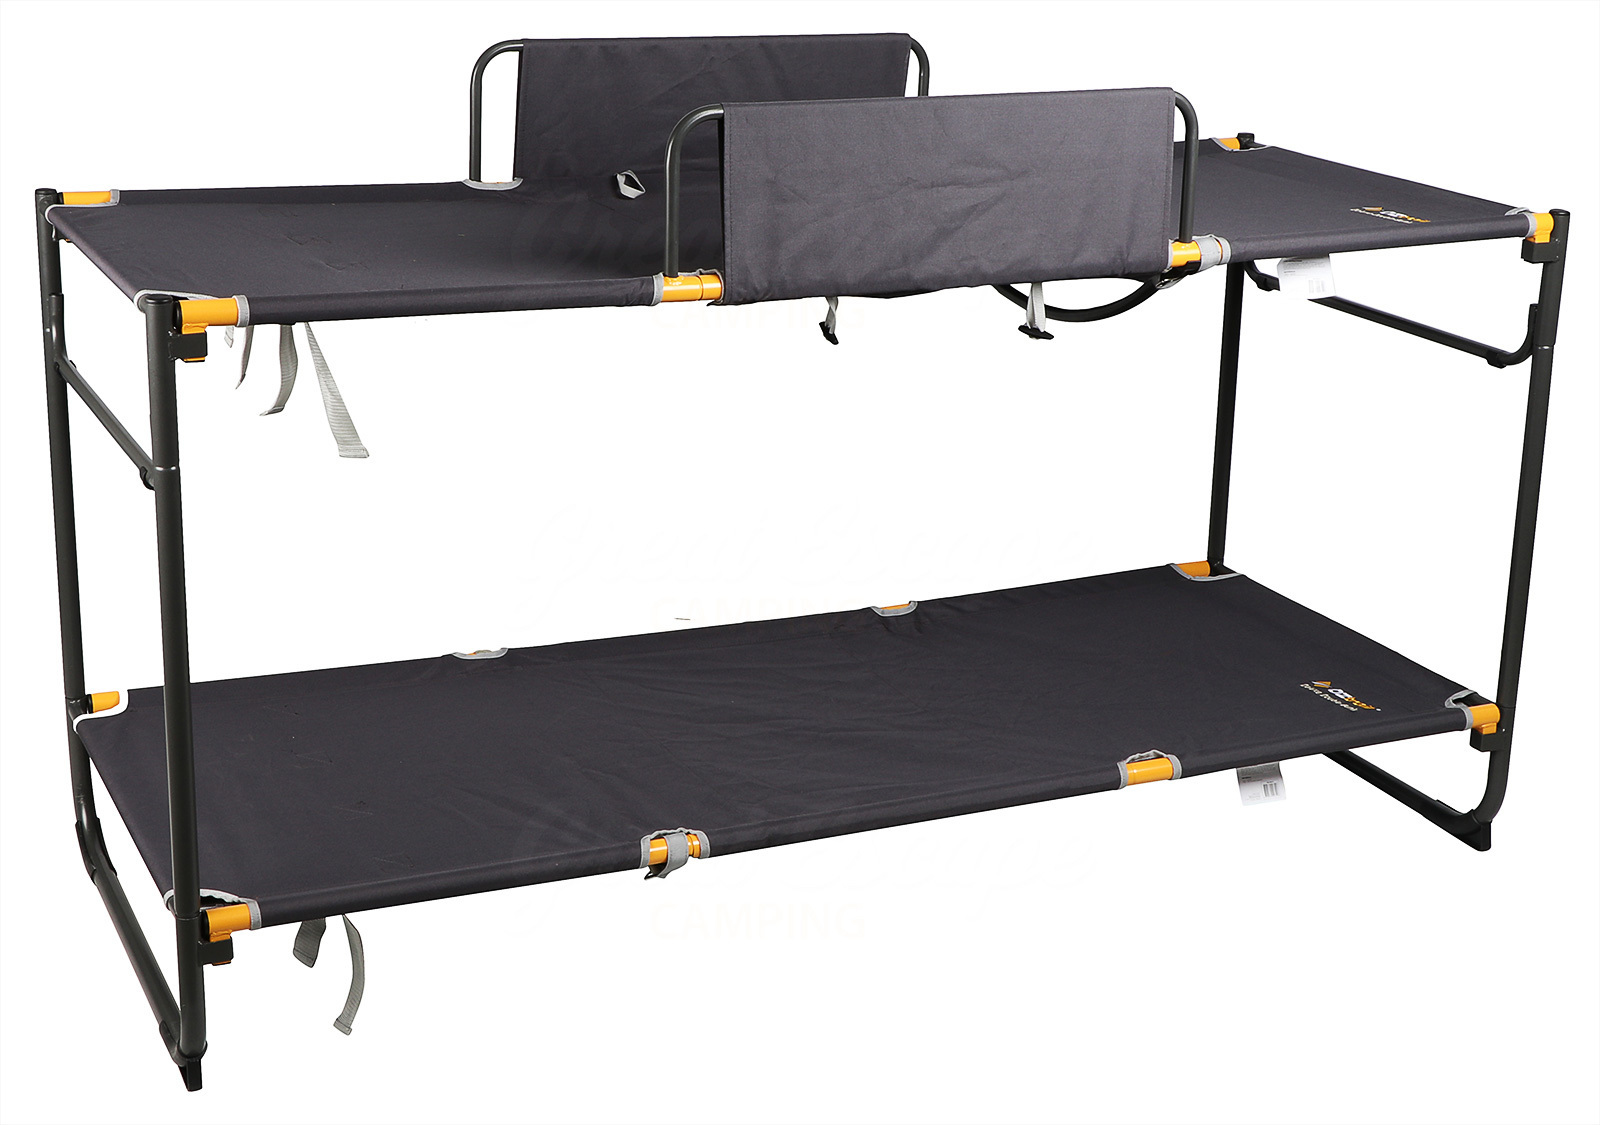 oztent camp stretchers